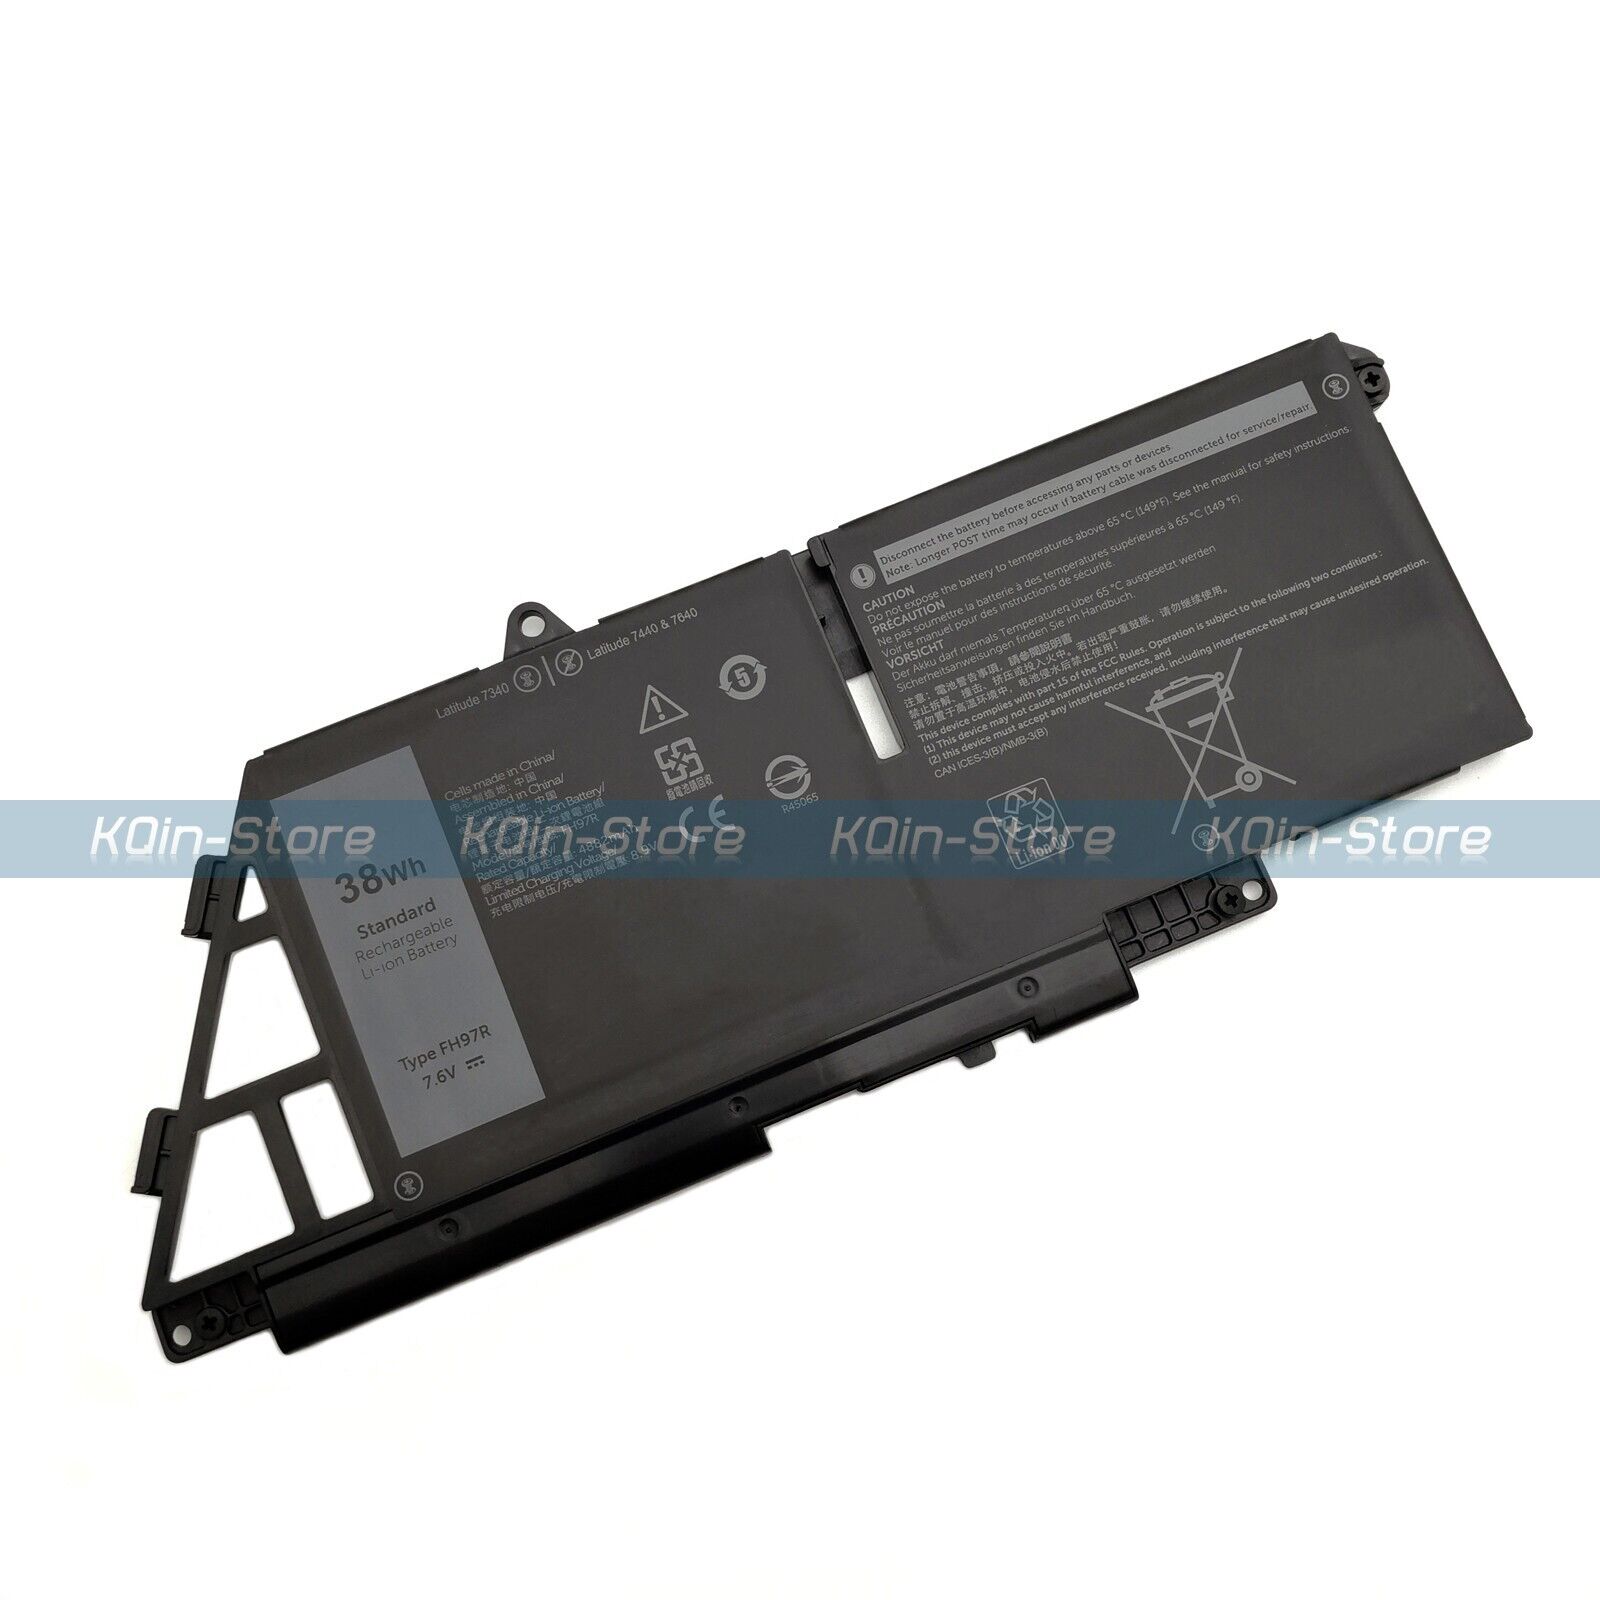 New FH97R 76KVG 599M7 2Cell Laptop Battery for Dell Latitude 7340 7440 7640